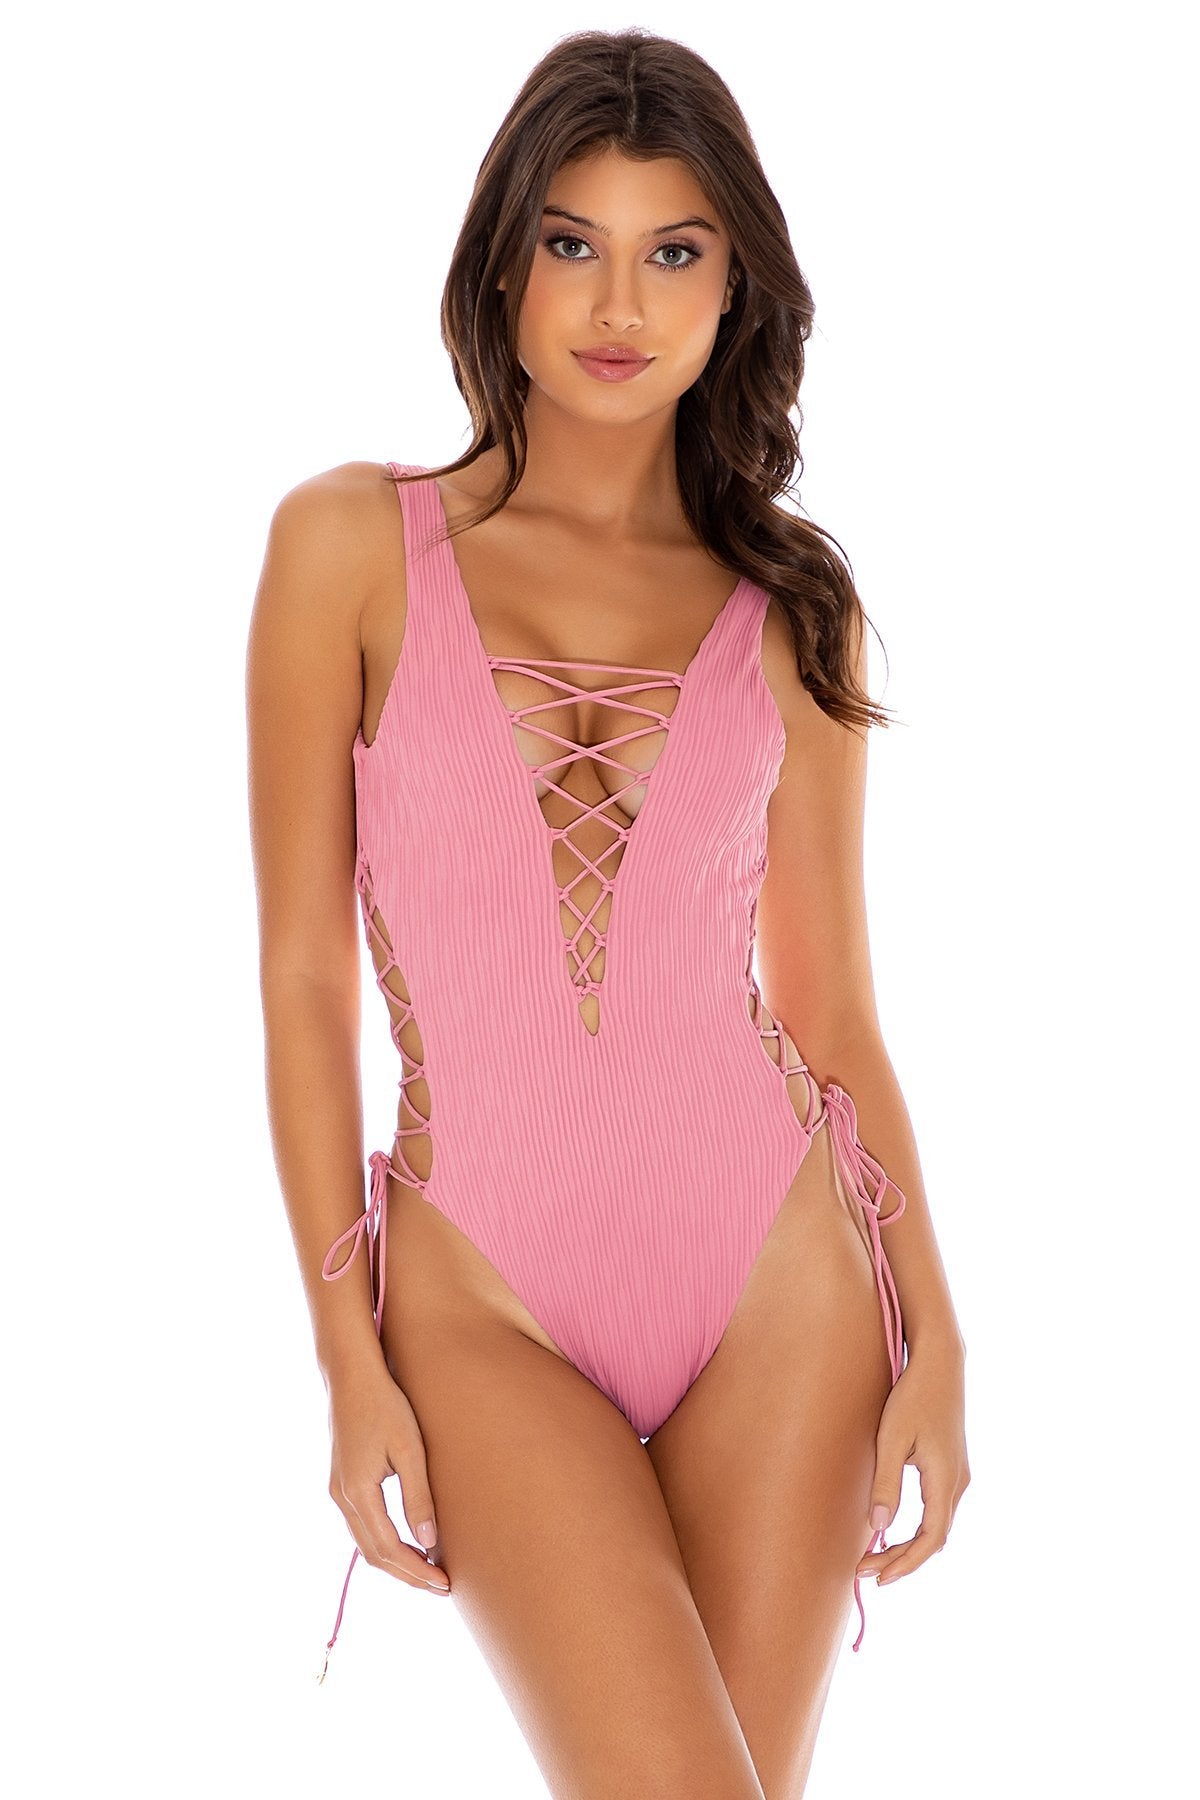 WMNS Lace Tied Side Underwire Cup Open Back High Leg Cut Swimsuit